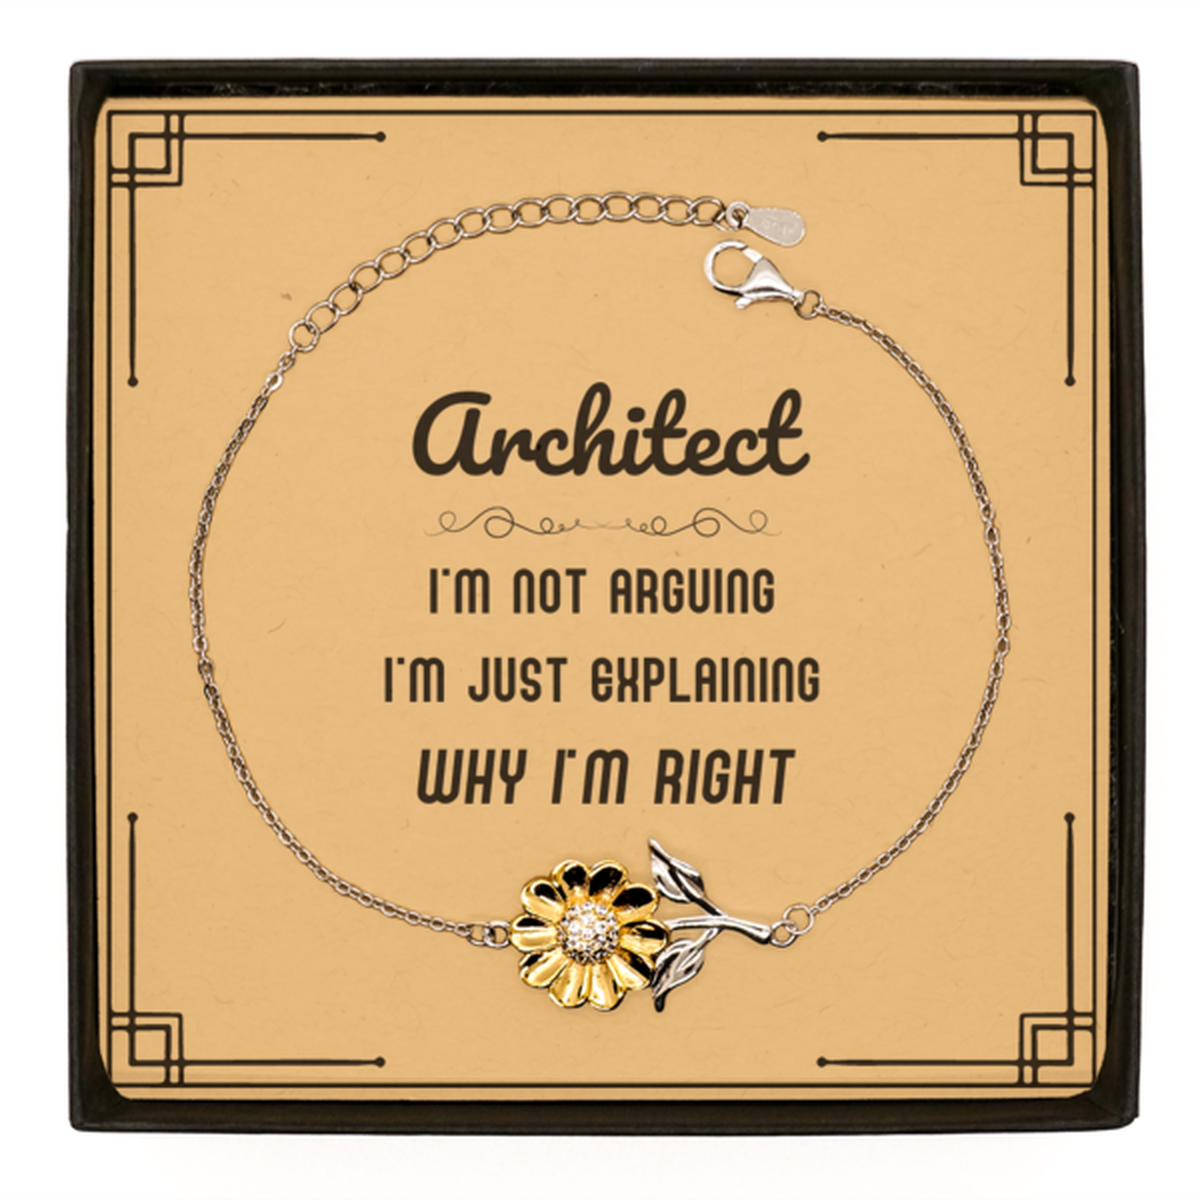 Architect I'm not Arguing. I'm Just Explaining Why I'm RIGHT Sunflower Bracelet, Funny Saying Quote Architect Gifts For Architect Message Card Graduation Birthday Christmas Gifts for Men Women Coworker